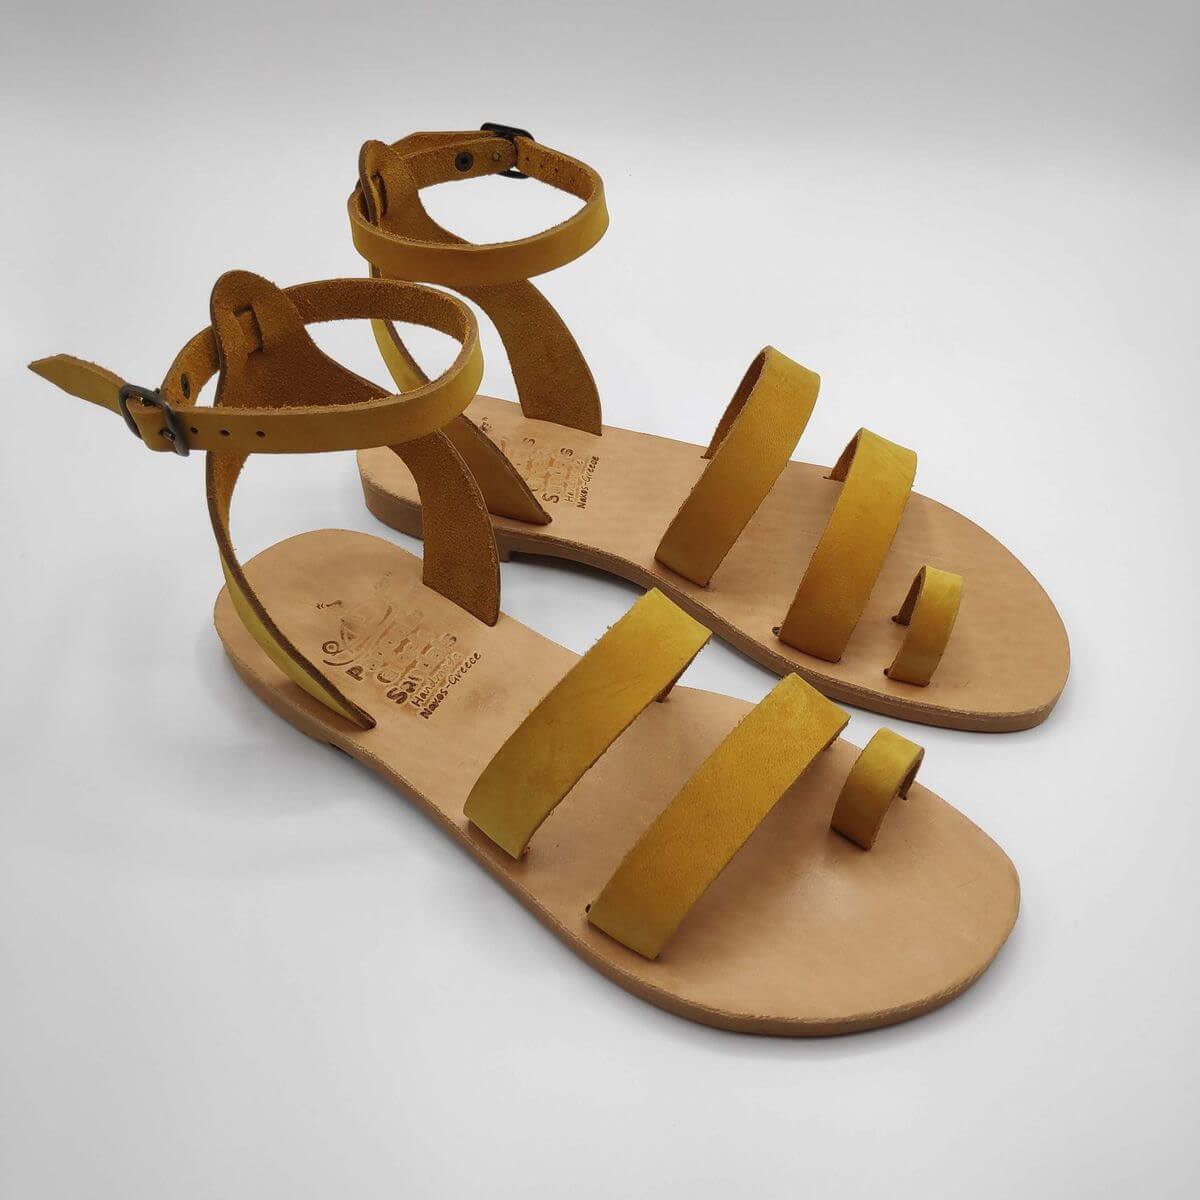 Yellow nubuck leather dressy sandals with two straps, toe ring and high ankle strap, side view